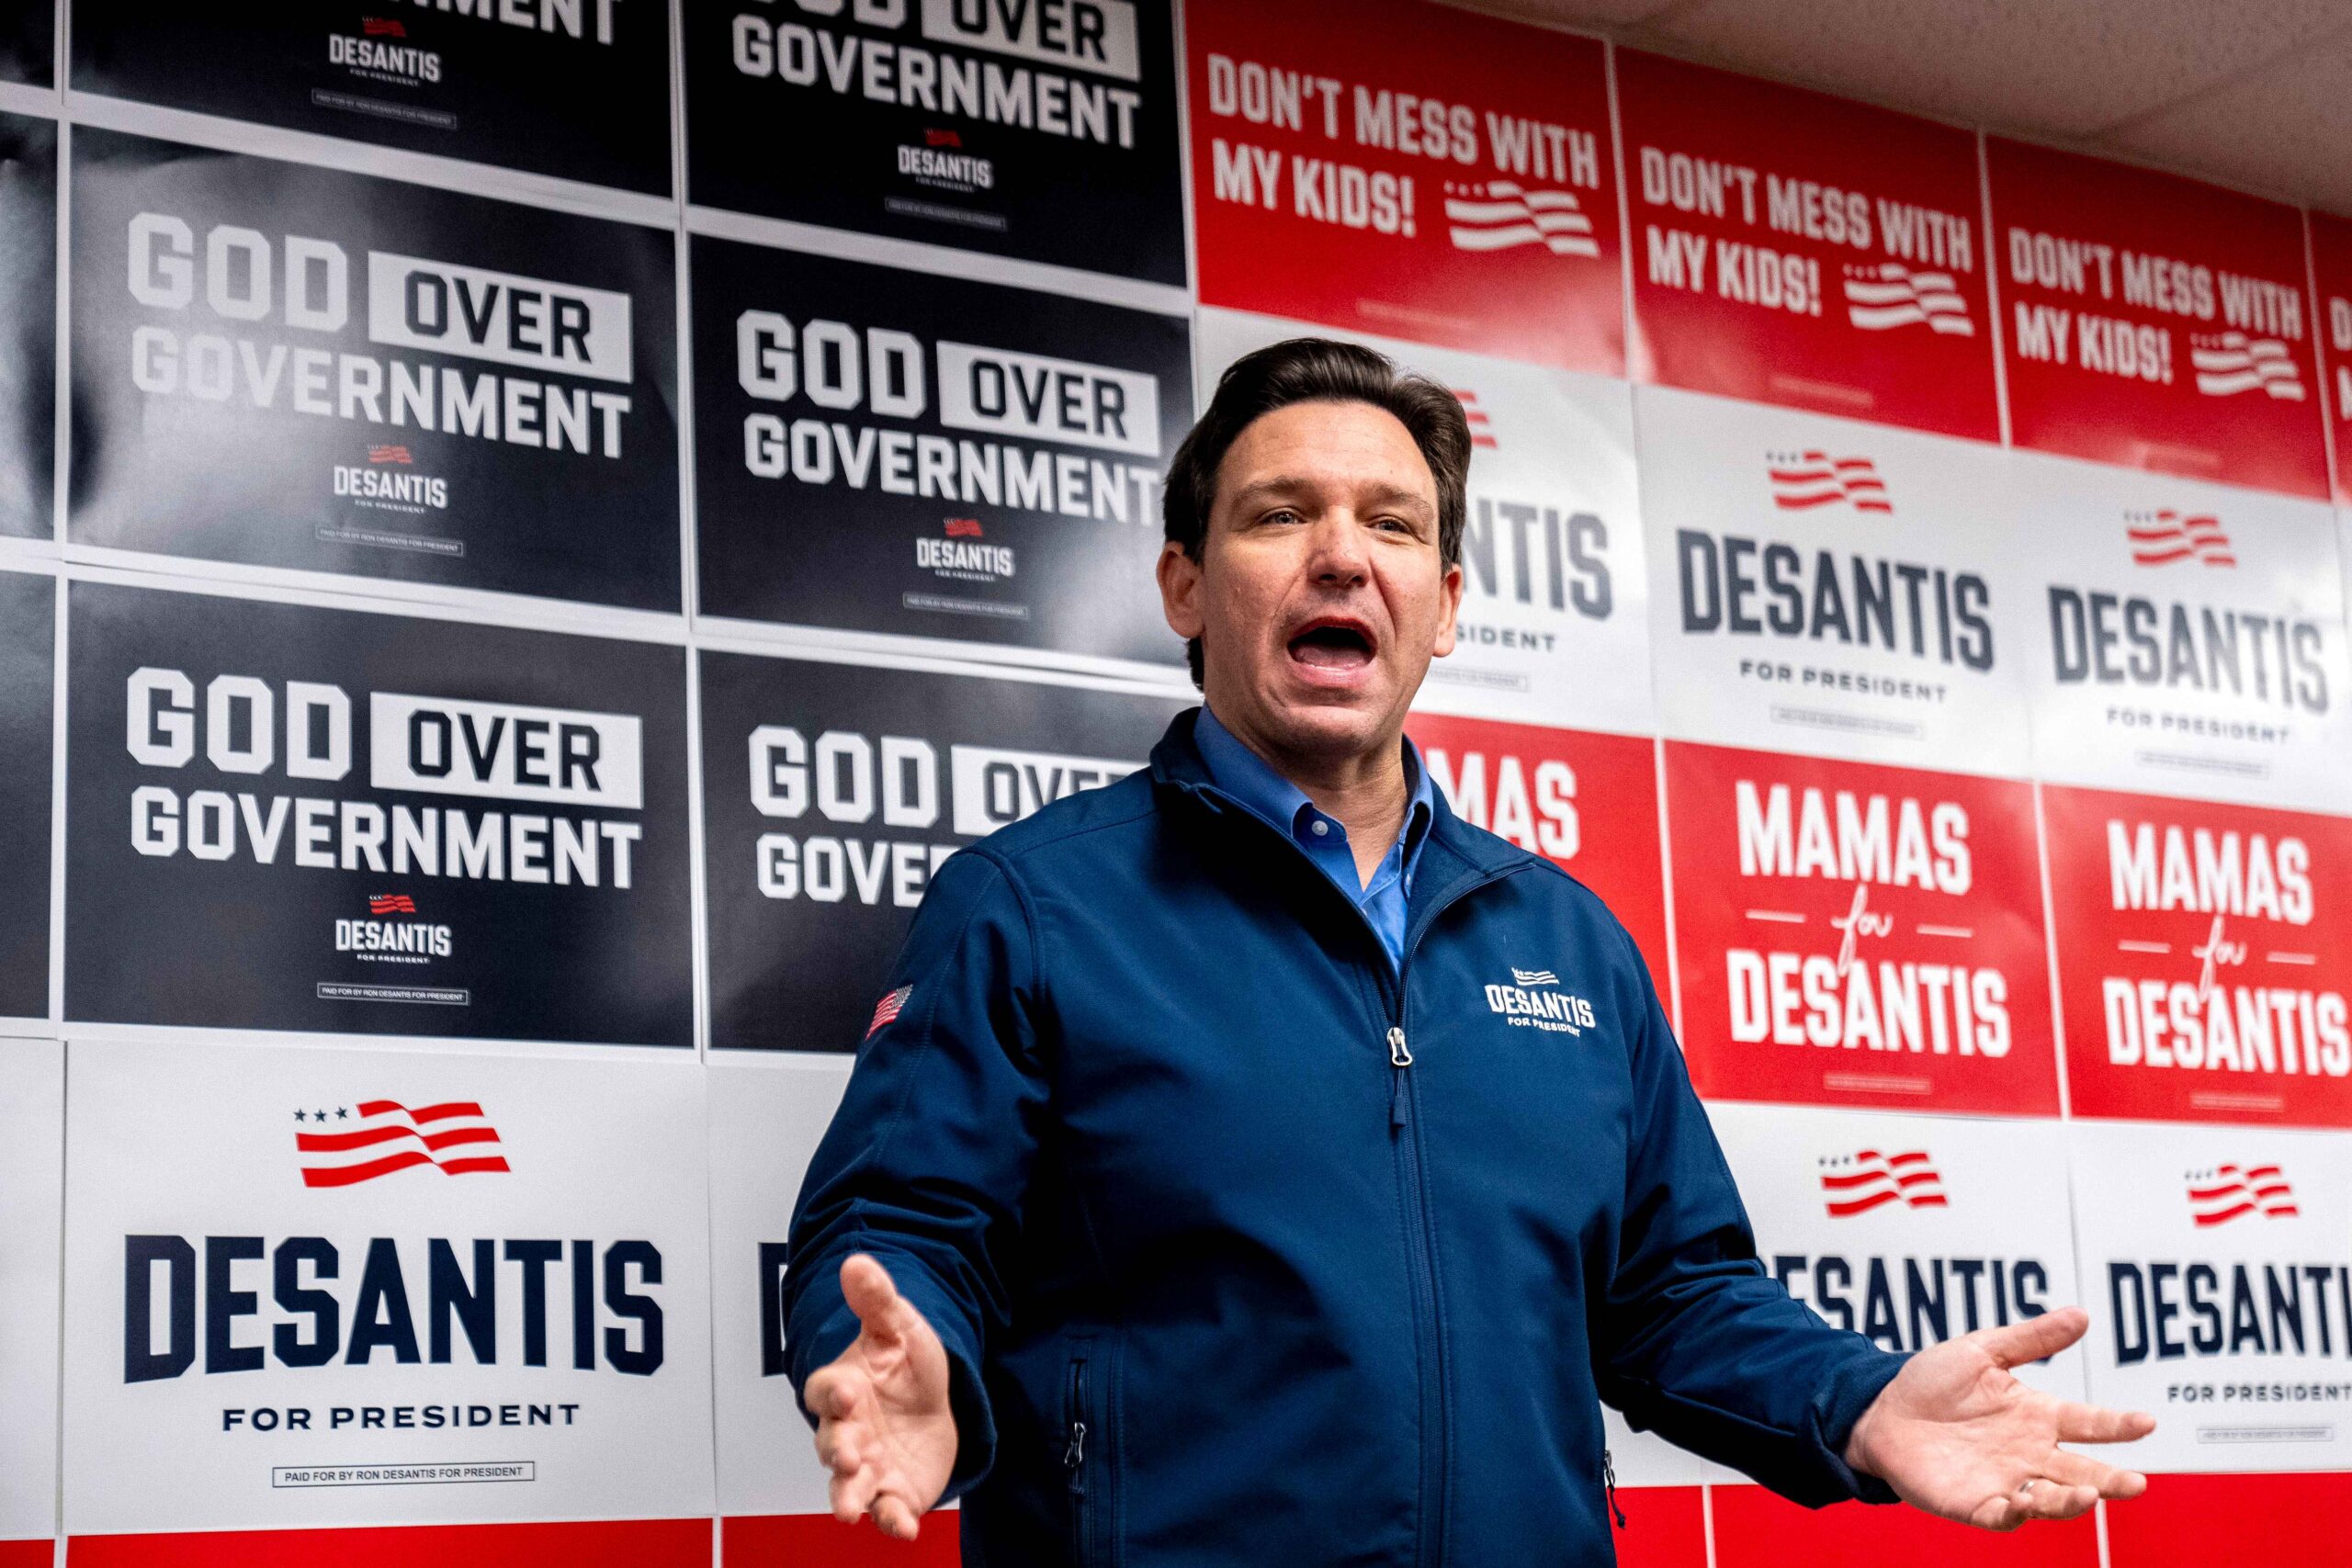 Ron DeSantis and his associated super PAC “Never Back Down” spent a combined $168 million on his ill-fated presidential bid, new campaign filings reveal.